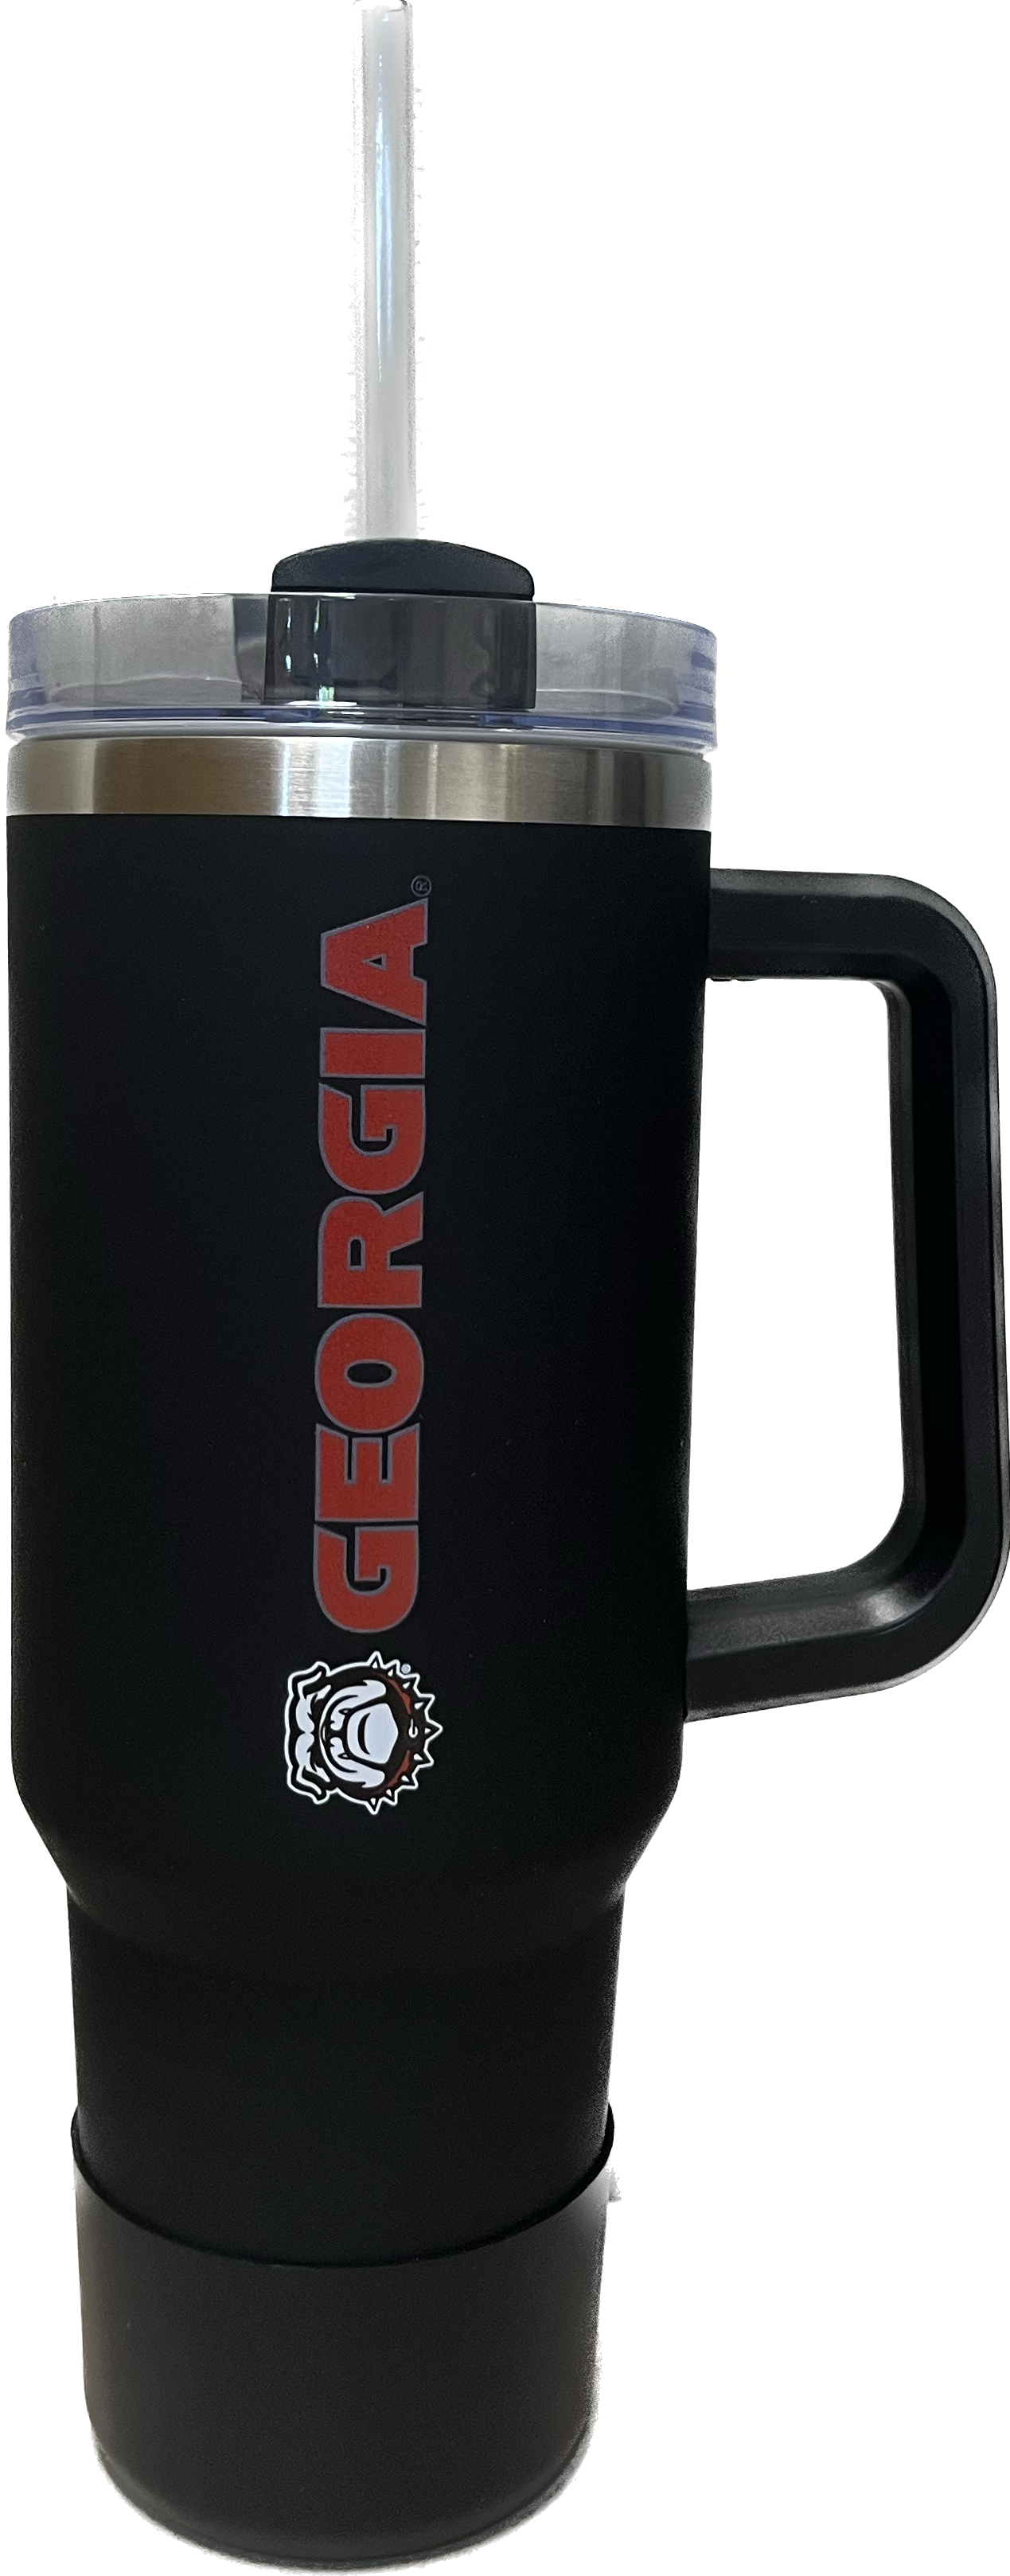 THE FANATIC GROUP GEORGIA 20OZ. STAINLESS STEEL ROADIE WITH HANDLE AND STRAW - PRIMARY LOGO